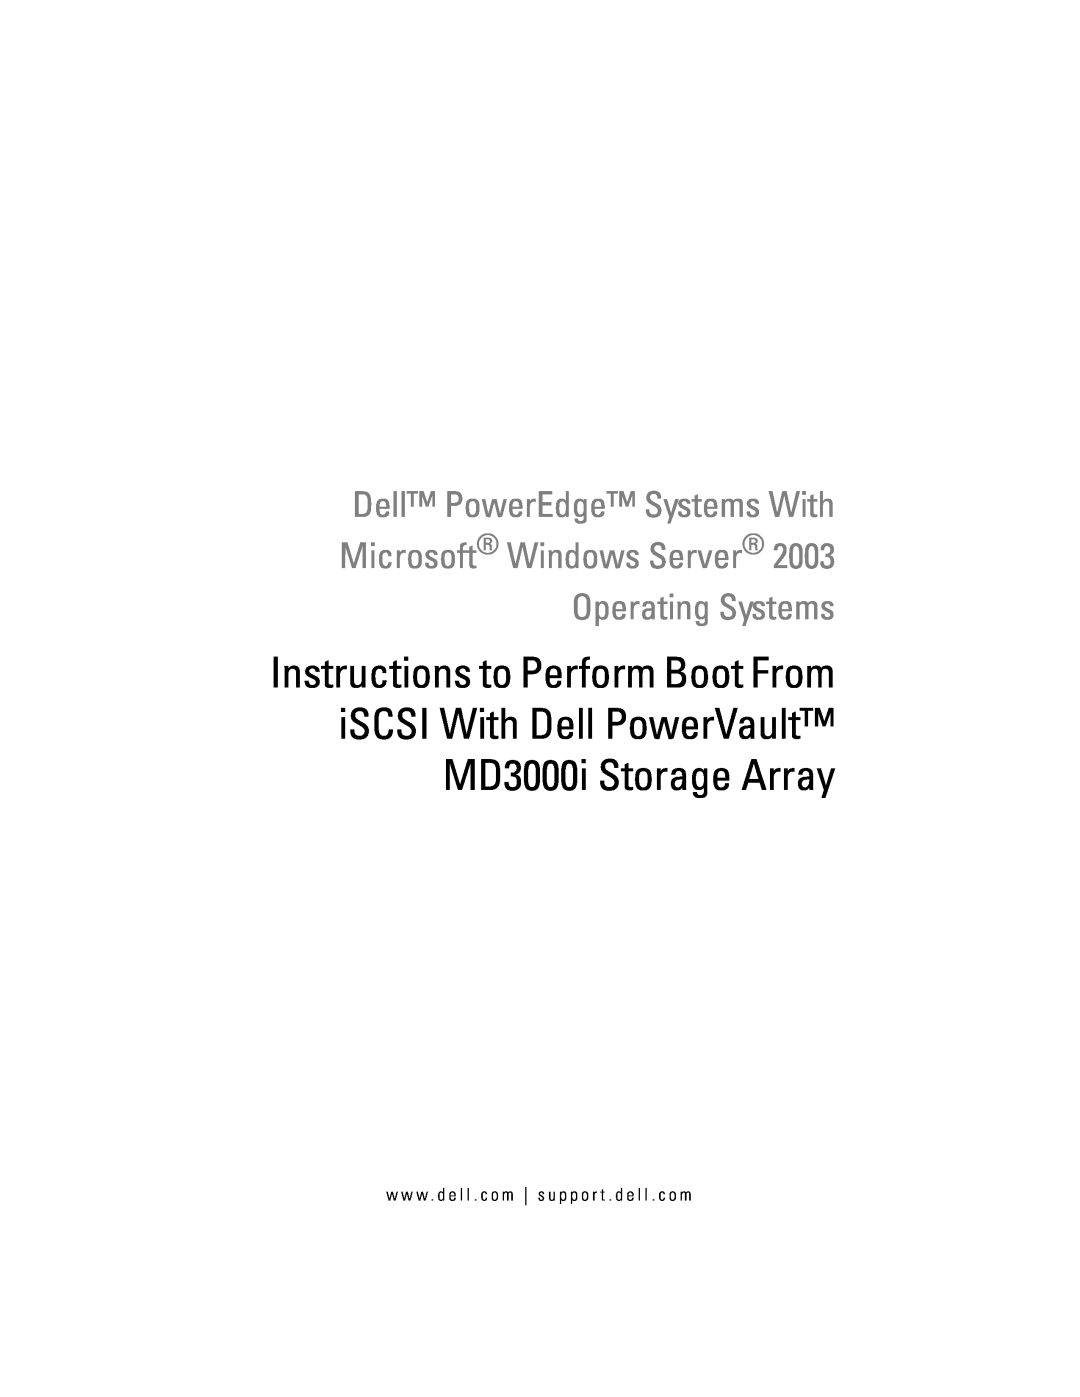 Dell MD3000I manual Microsoft Windows Server Operating Systems, Dell PowerEdge Systems With 